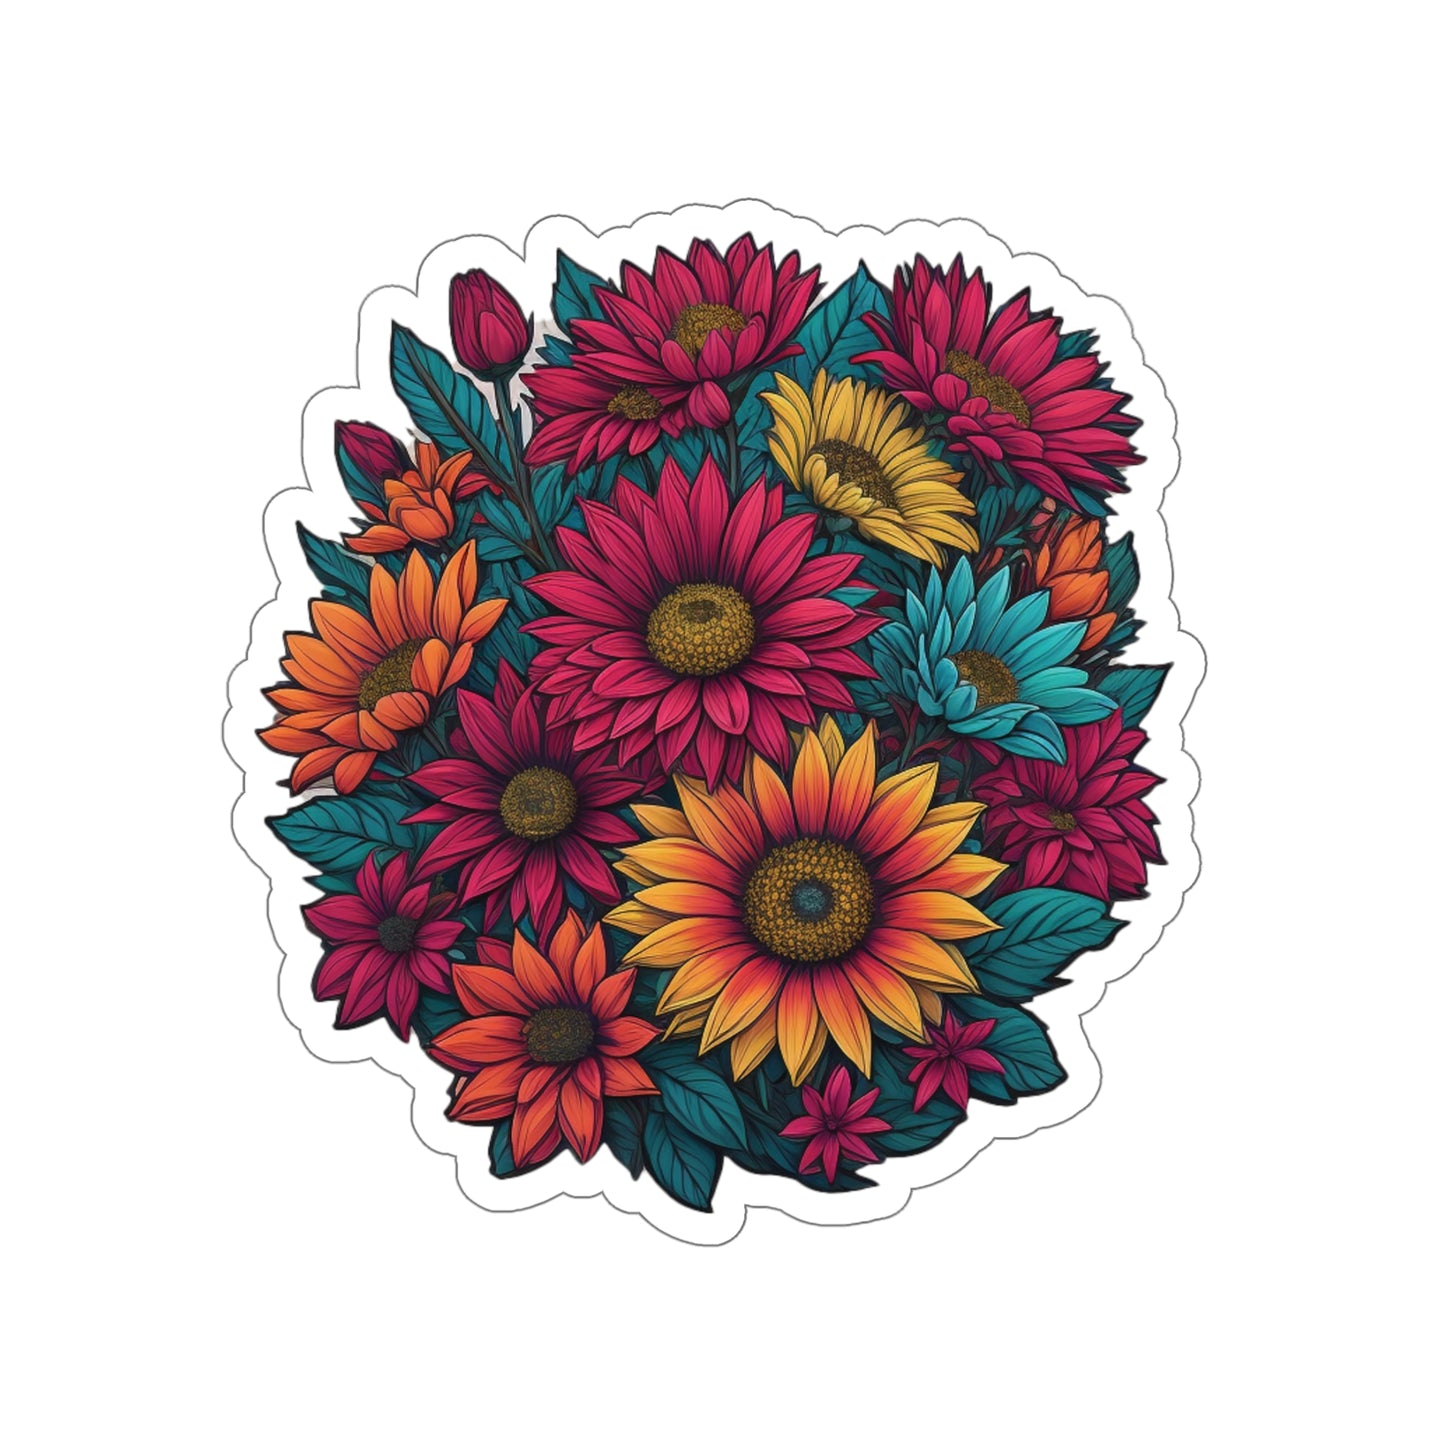 Fun Flowers Daisies Bright Colors | Fun Stickers | Happy Stickers | Must Have Stickers | Laptop Stickers | Best Stickers | Gift Idea